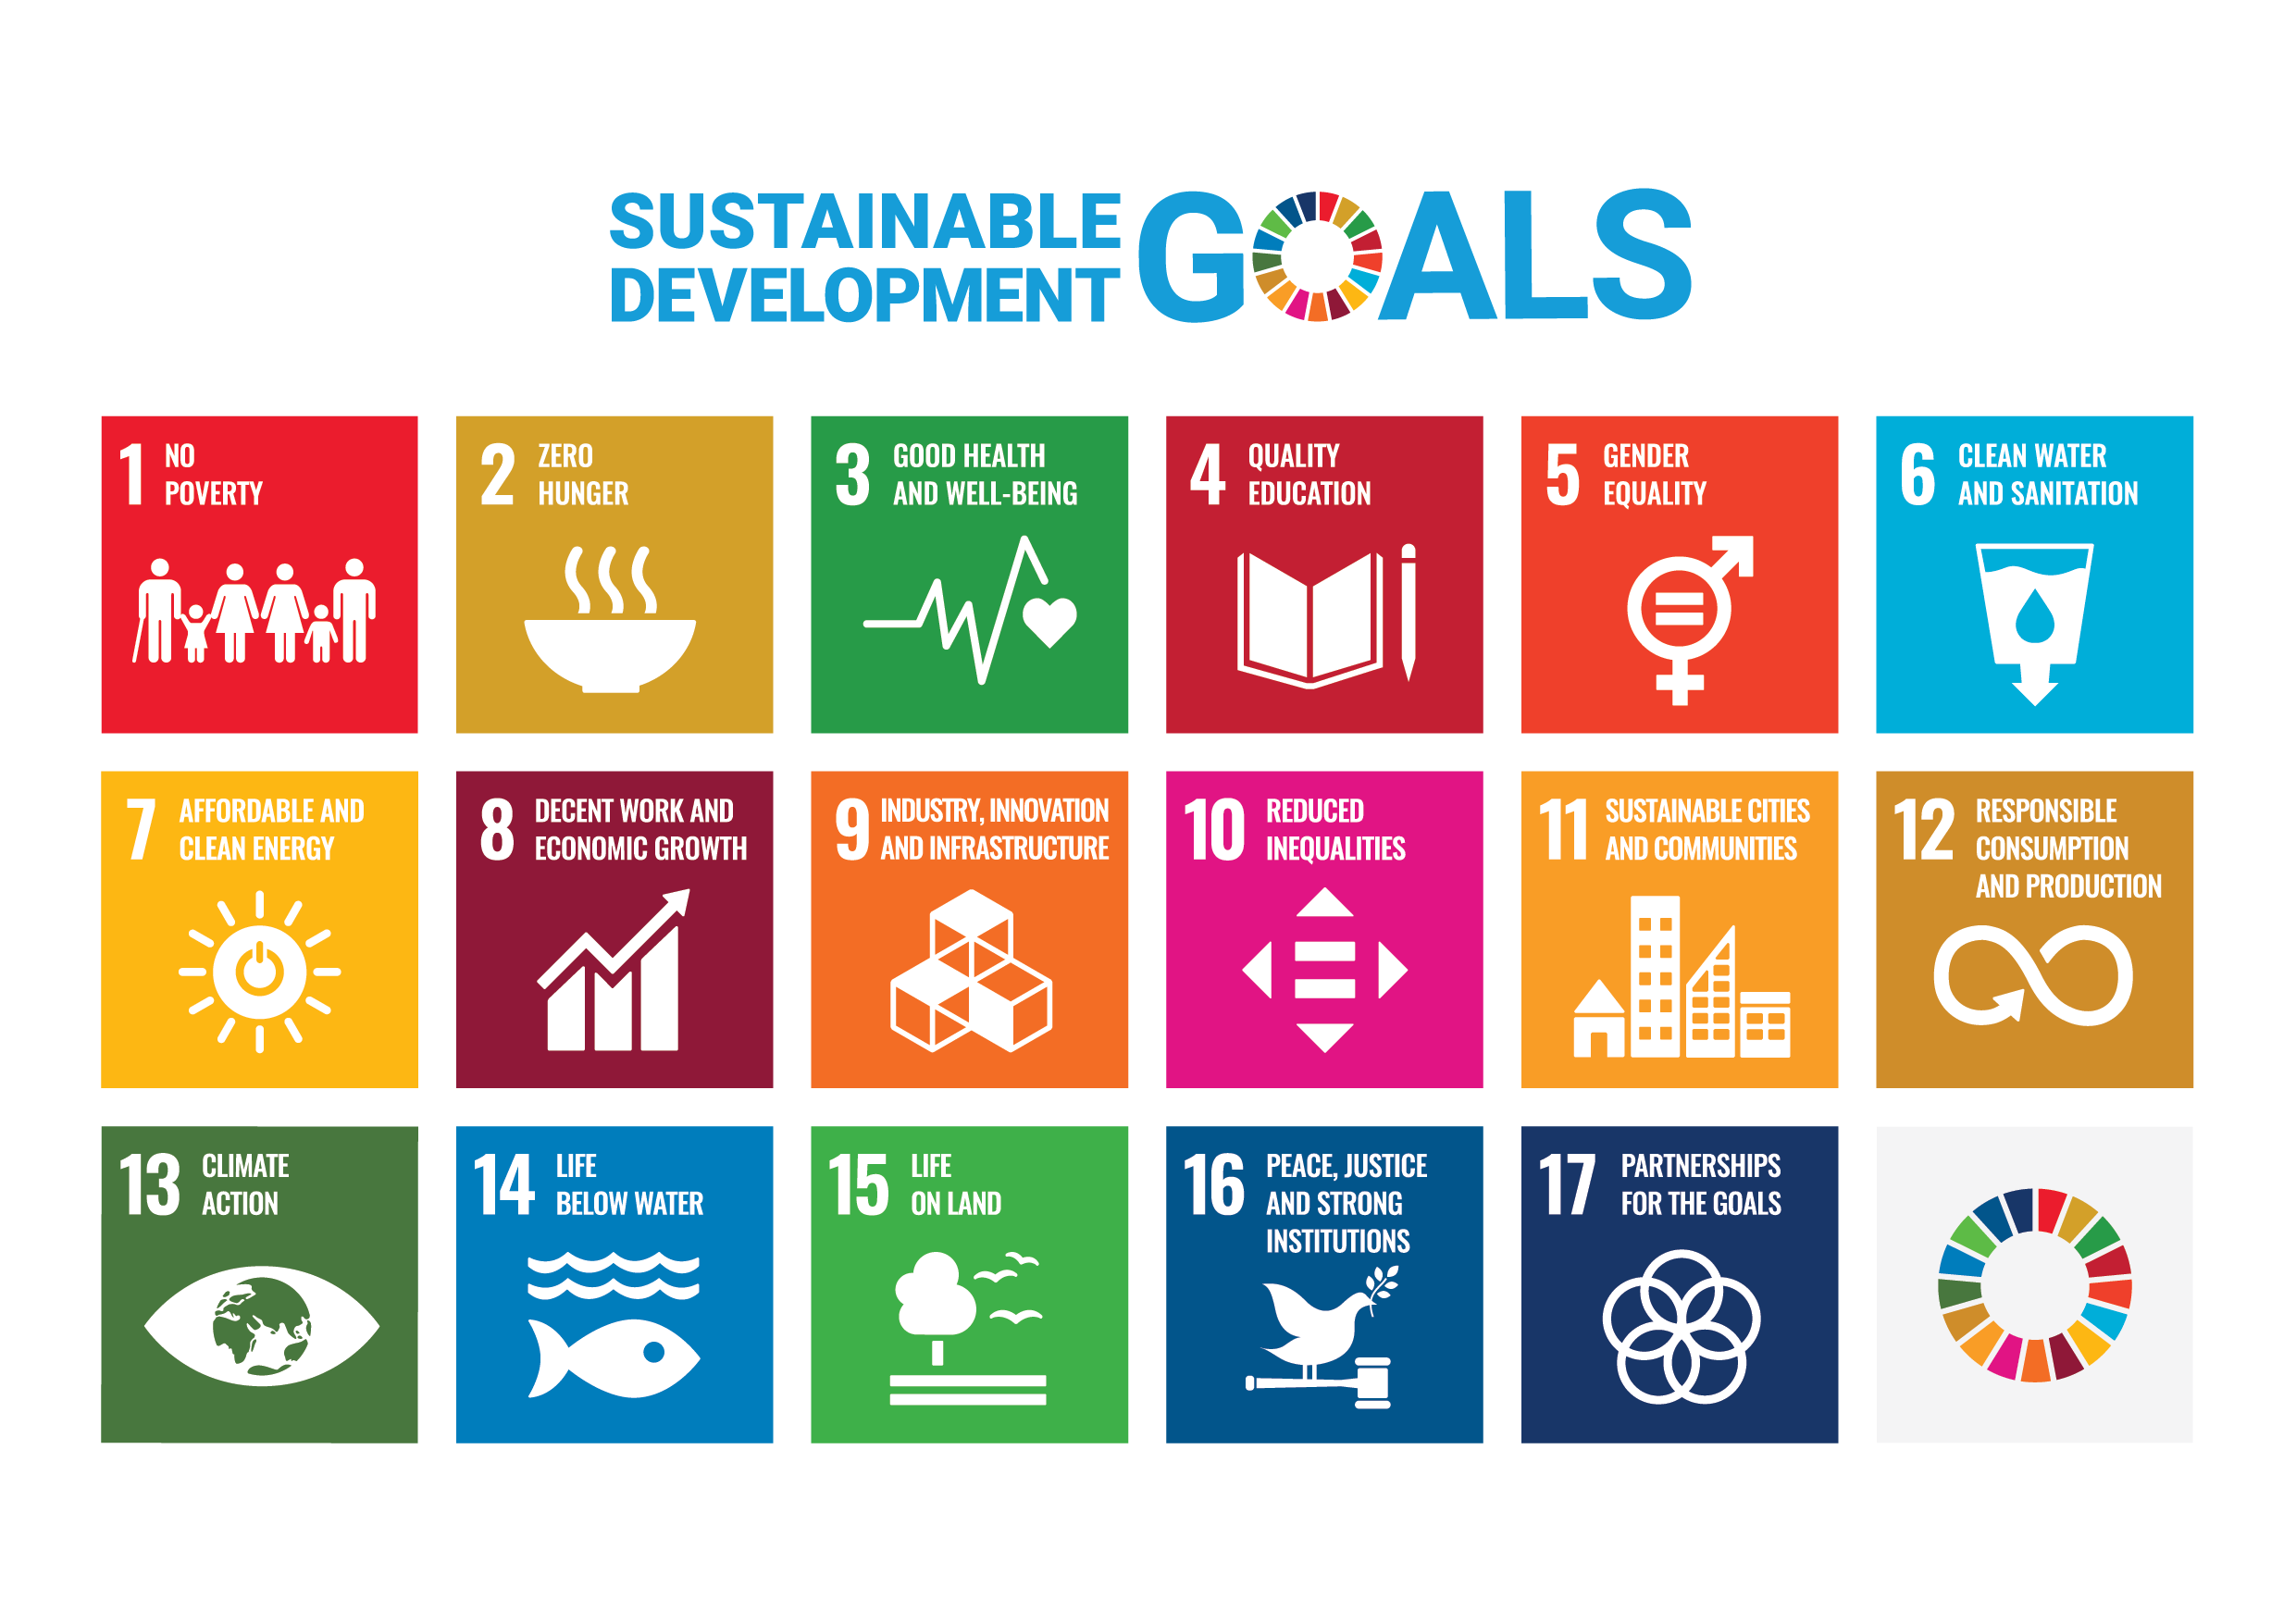 Grid with all 17 UN Sustainable Development Goals listed.